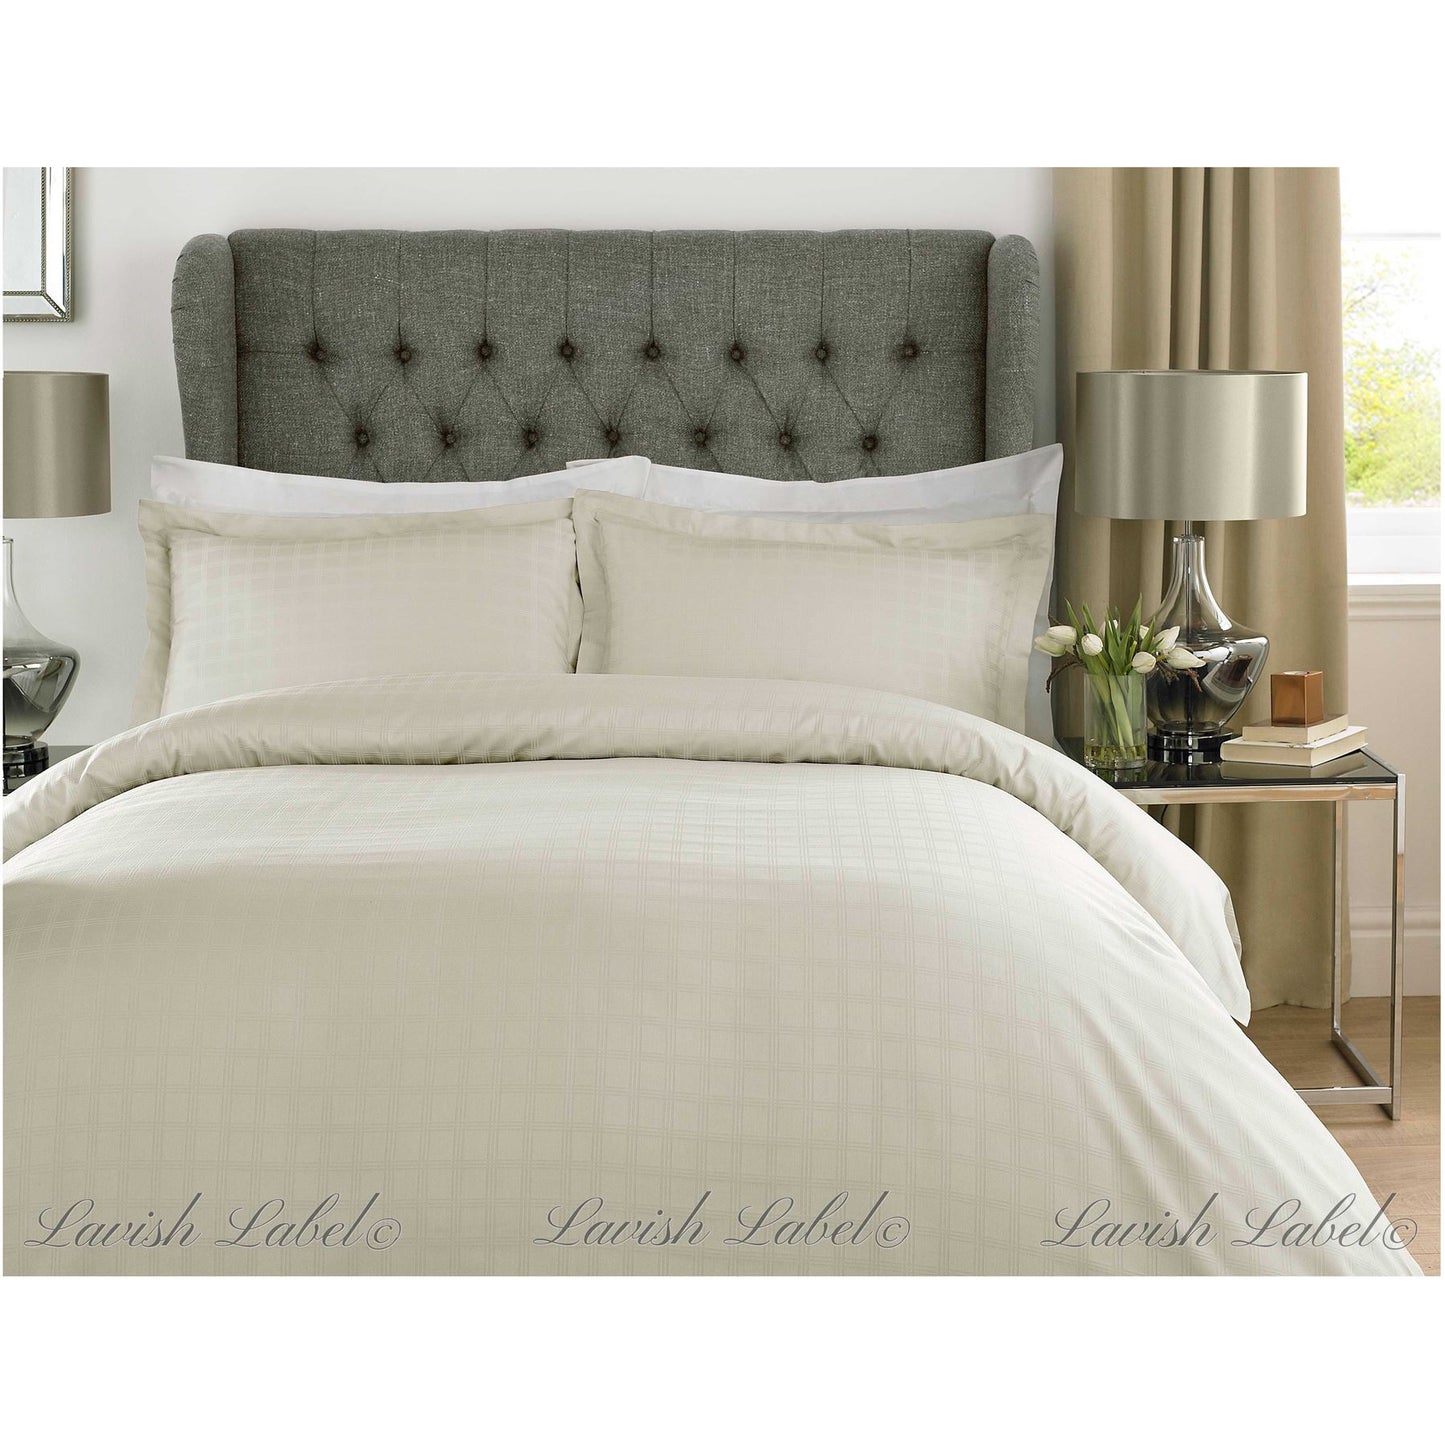 Create a Luxurious Bedroom with 100% Cotton Satin Stripe Check Duvet Set